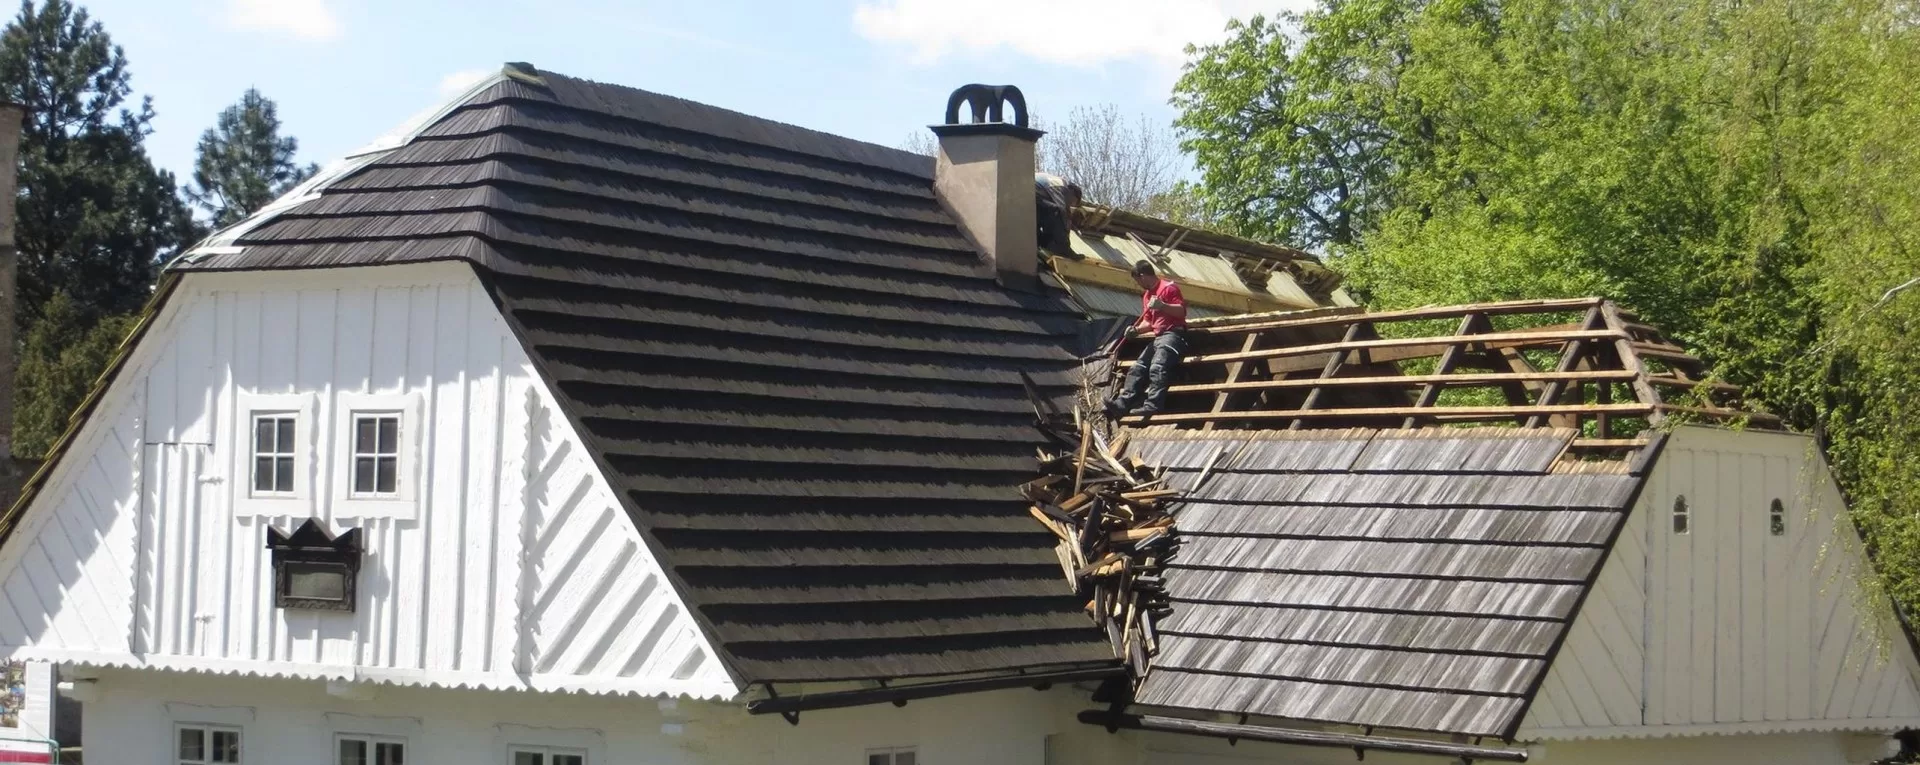 image - Emergency Roof Repairs What to Do When Disaster Strikes